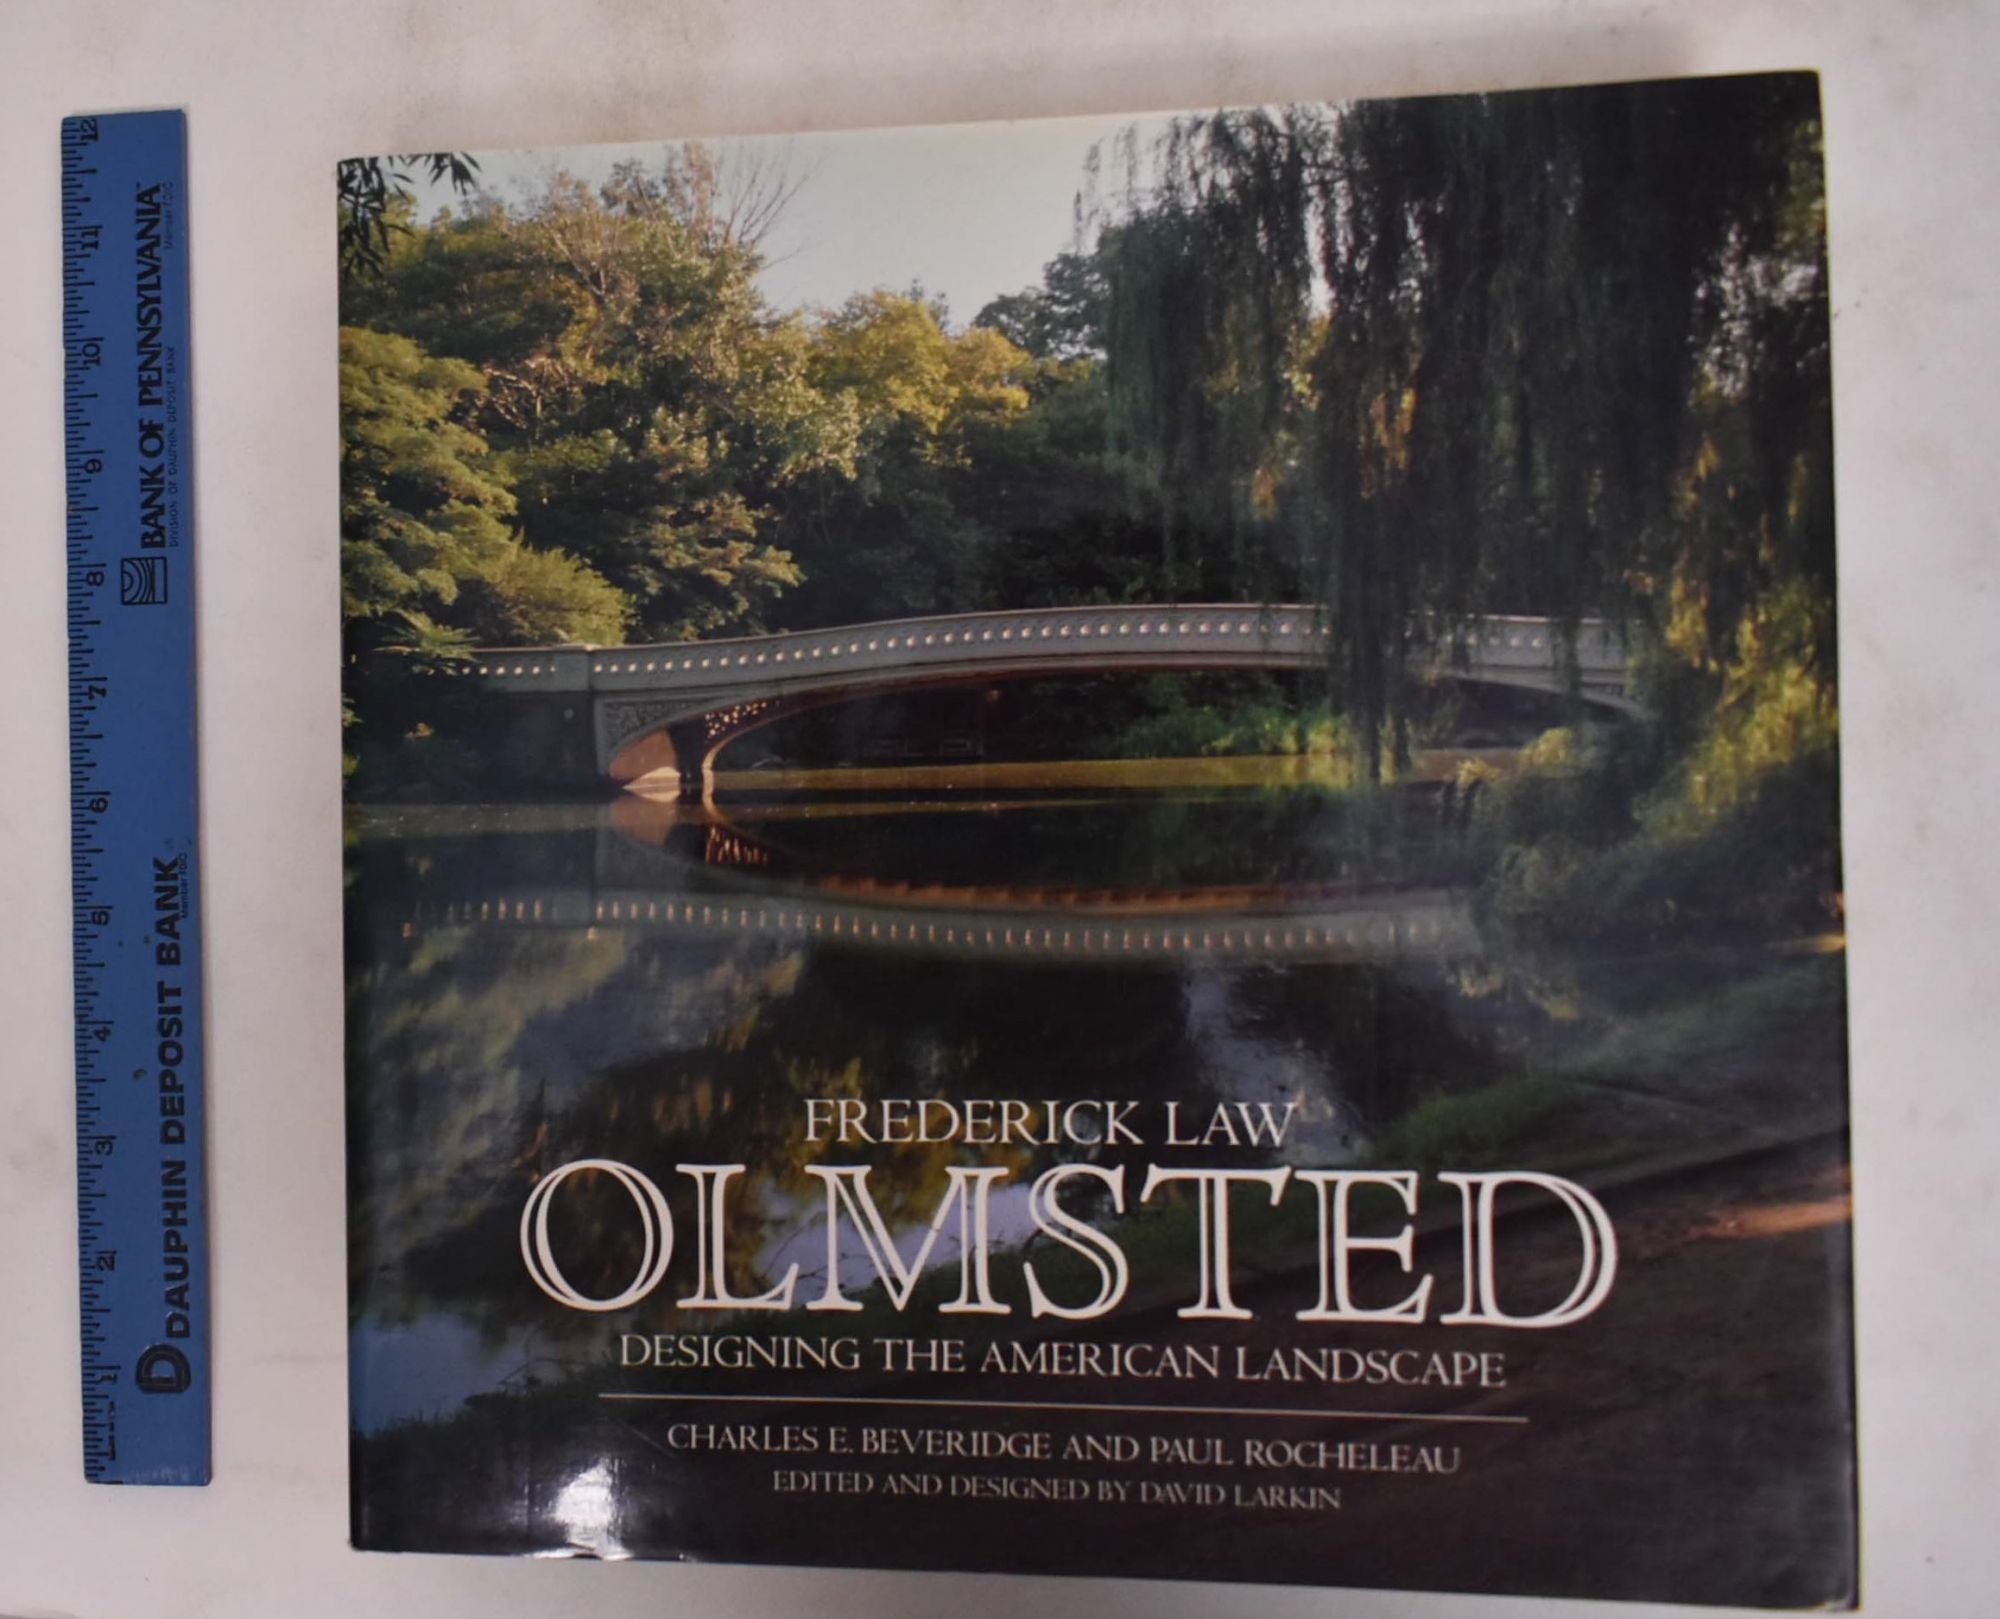 Beveridge, Charles E.; Paul Rocheleau and David Larkin - Frederick Law Olmsted Designing the American Landscape